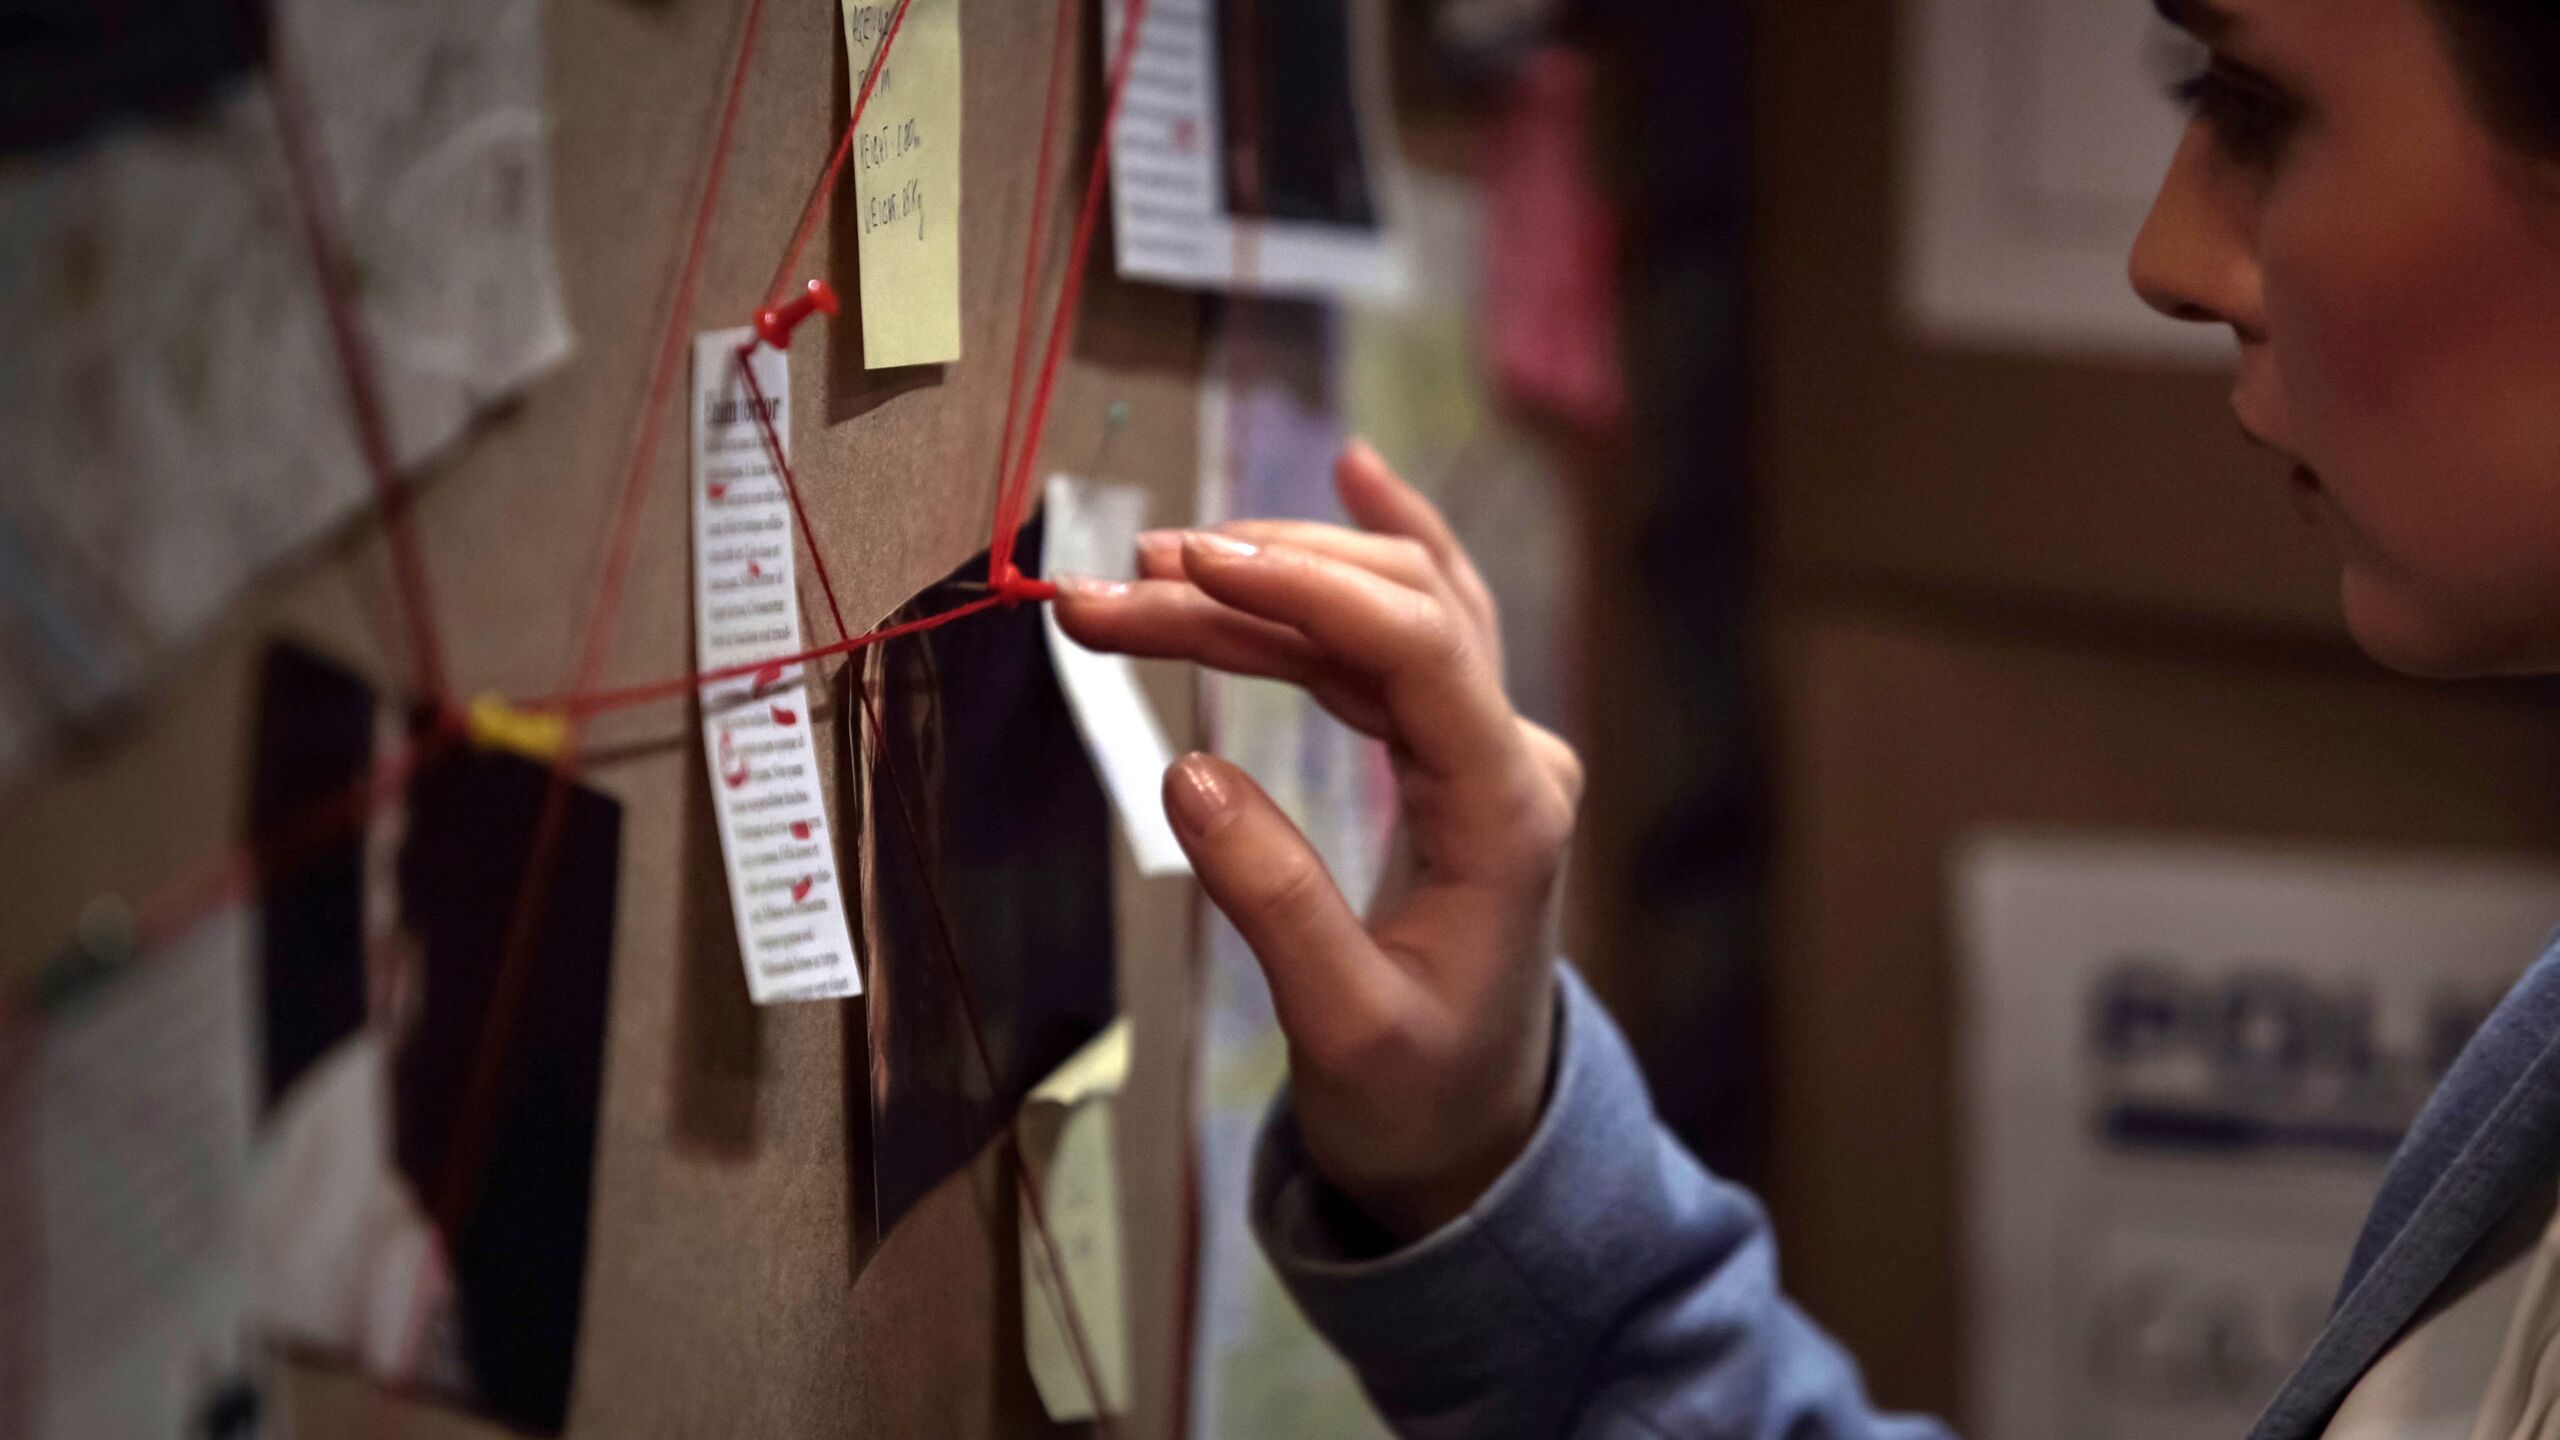 A female investigator looks at a corkboard with red string tying together various pinned up documents.